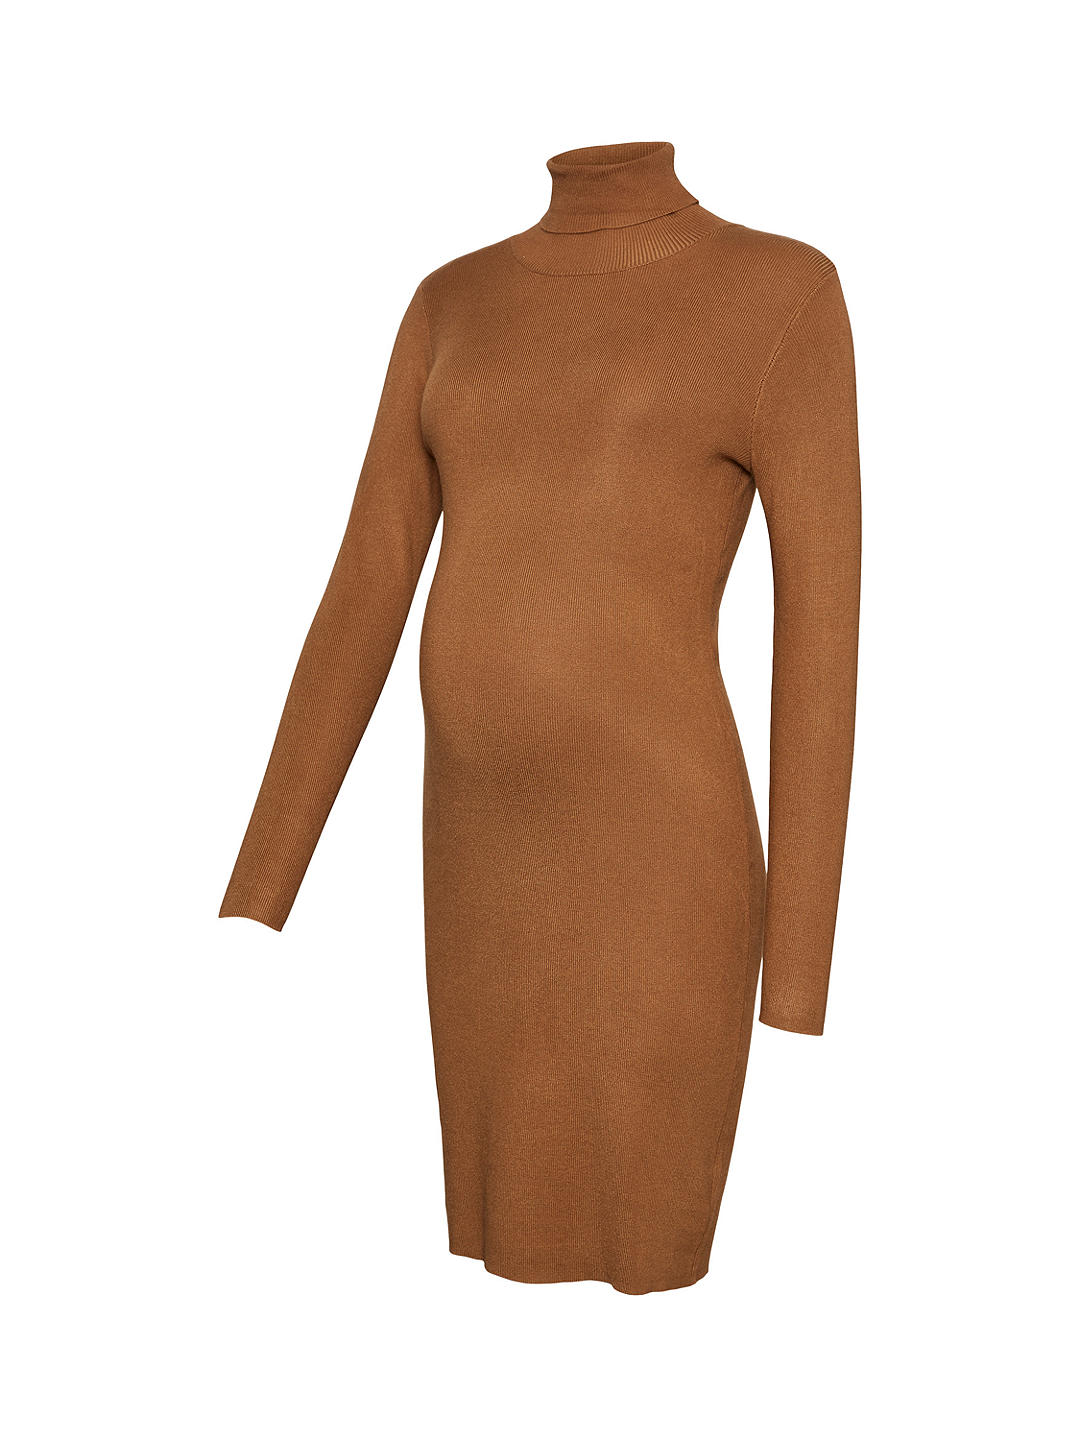 Mamalicious Jacina Knitted Rollneck Jumper Maternity Dress, Tobacco Brown